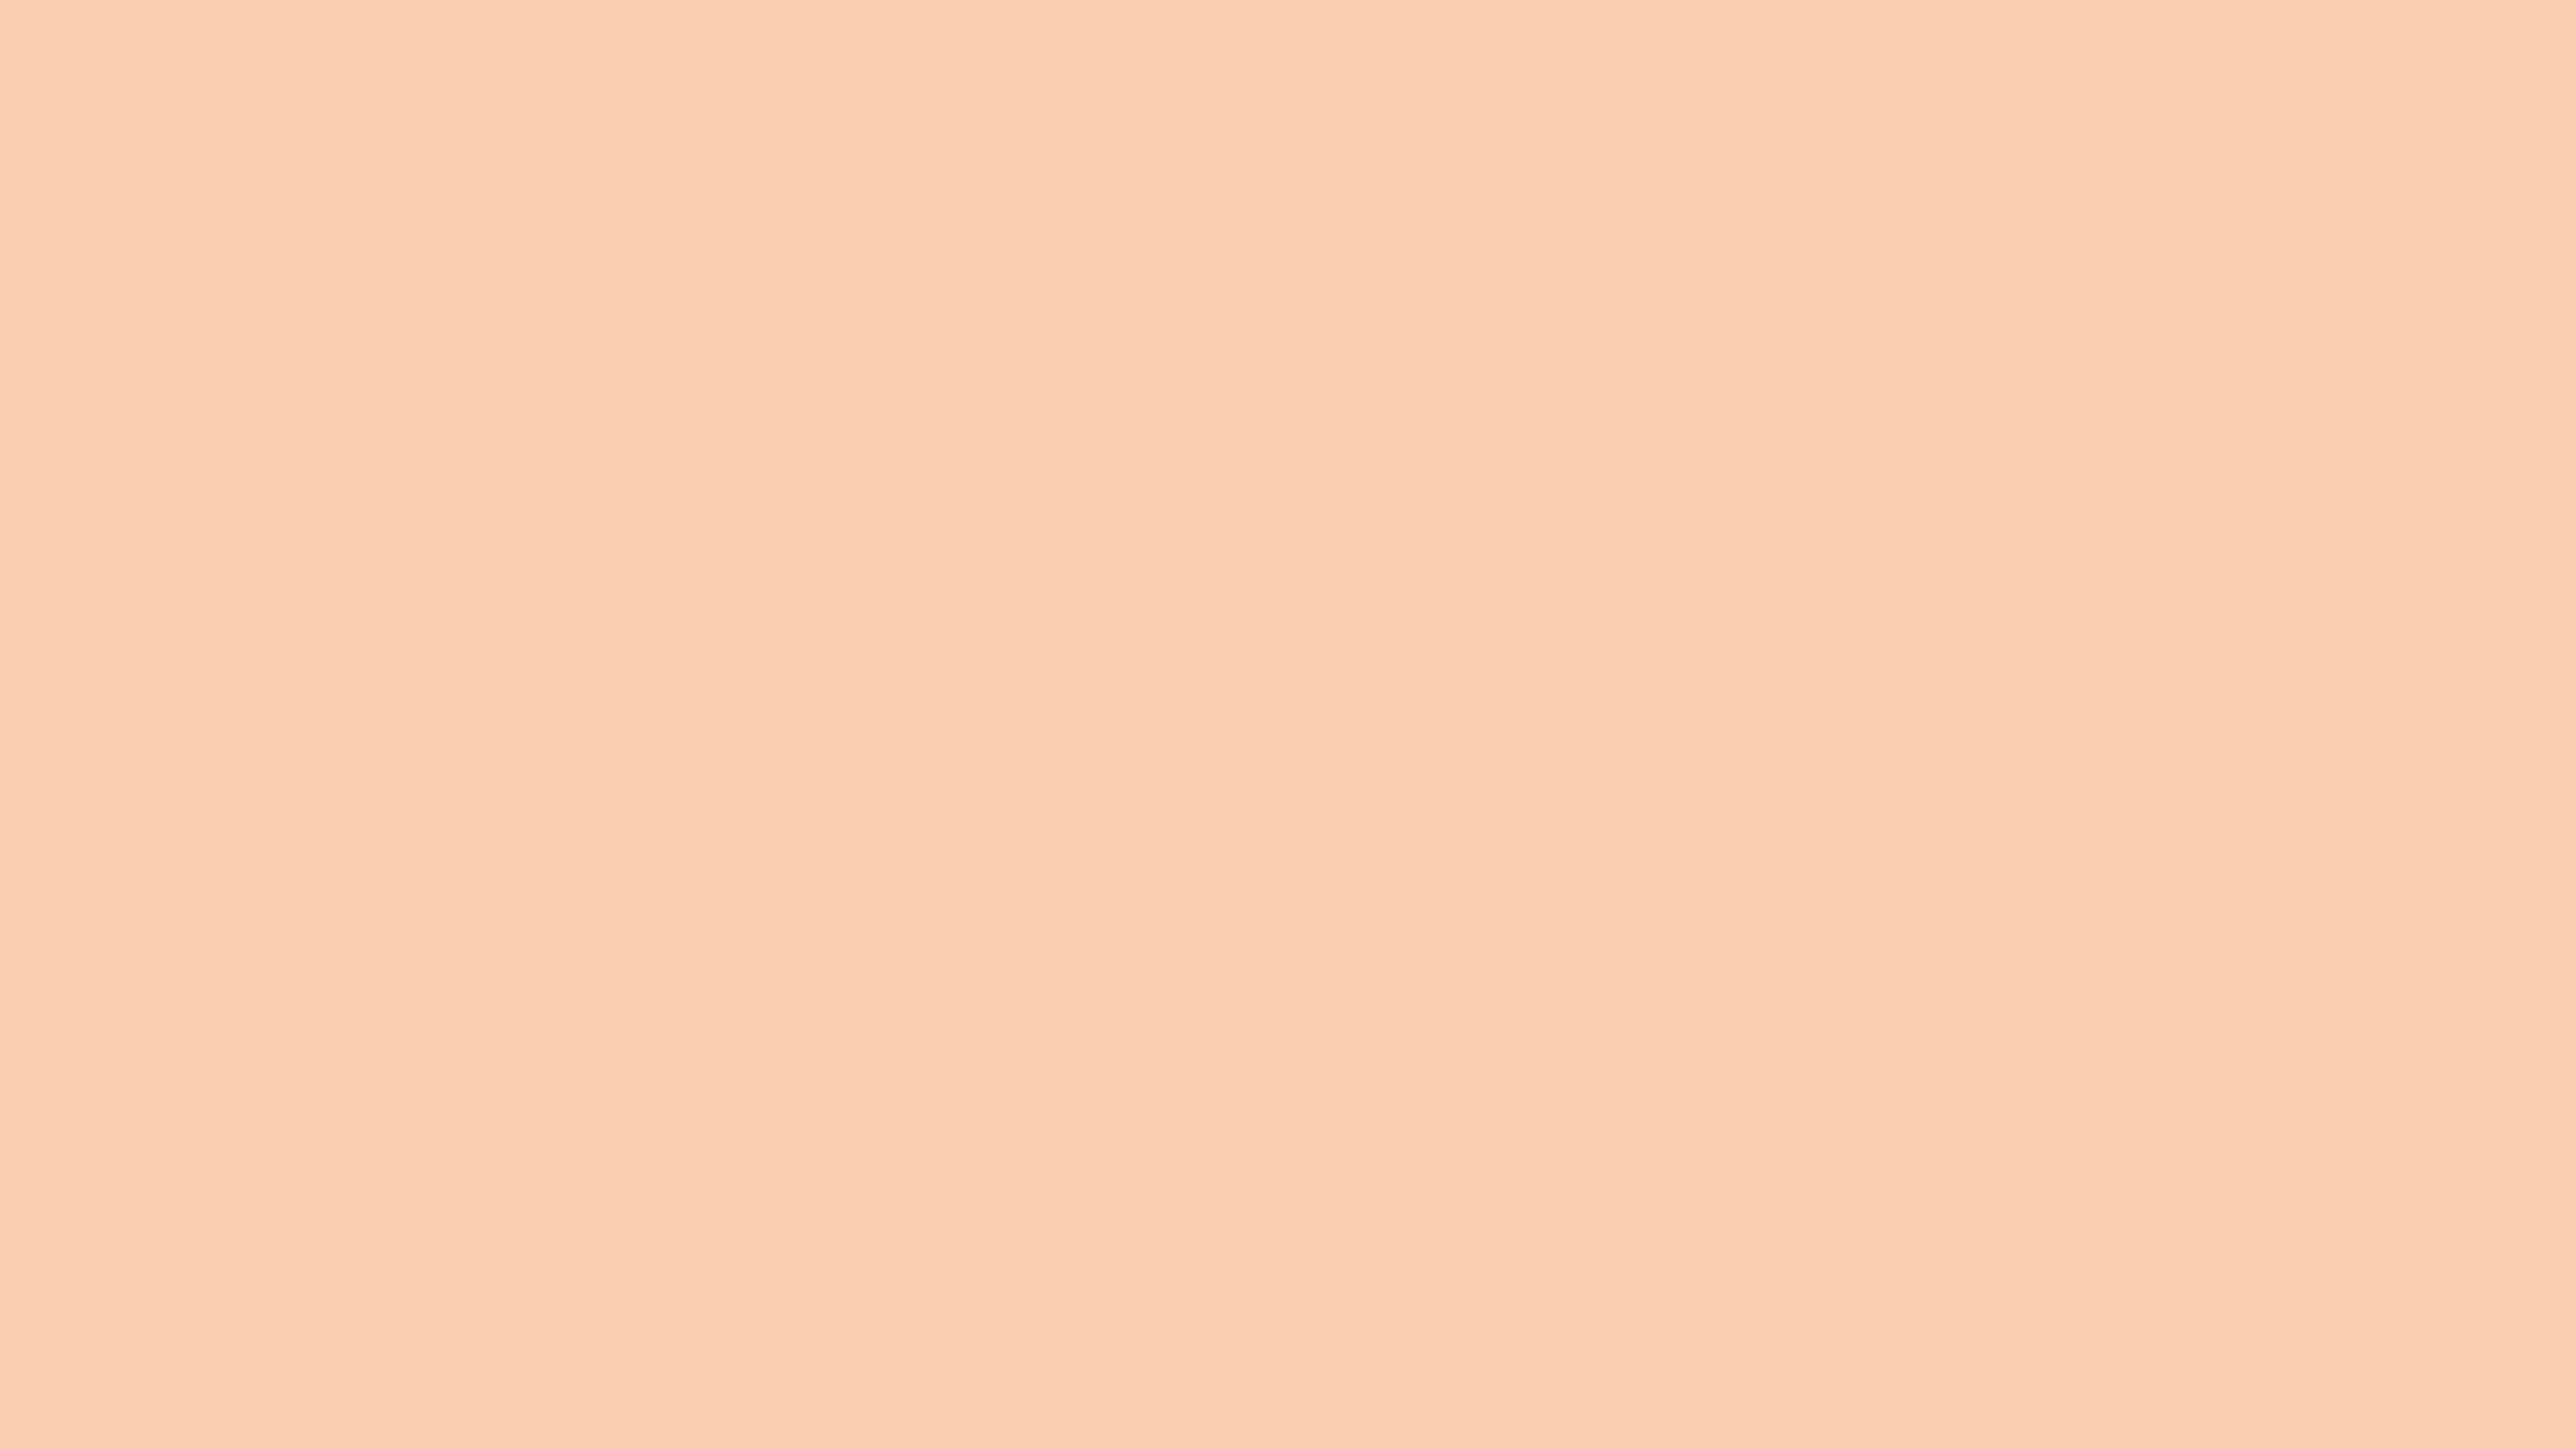 Apricot Solid Color 8K Wallpapers